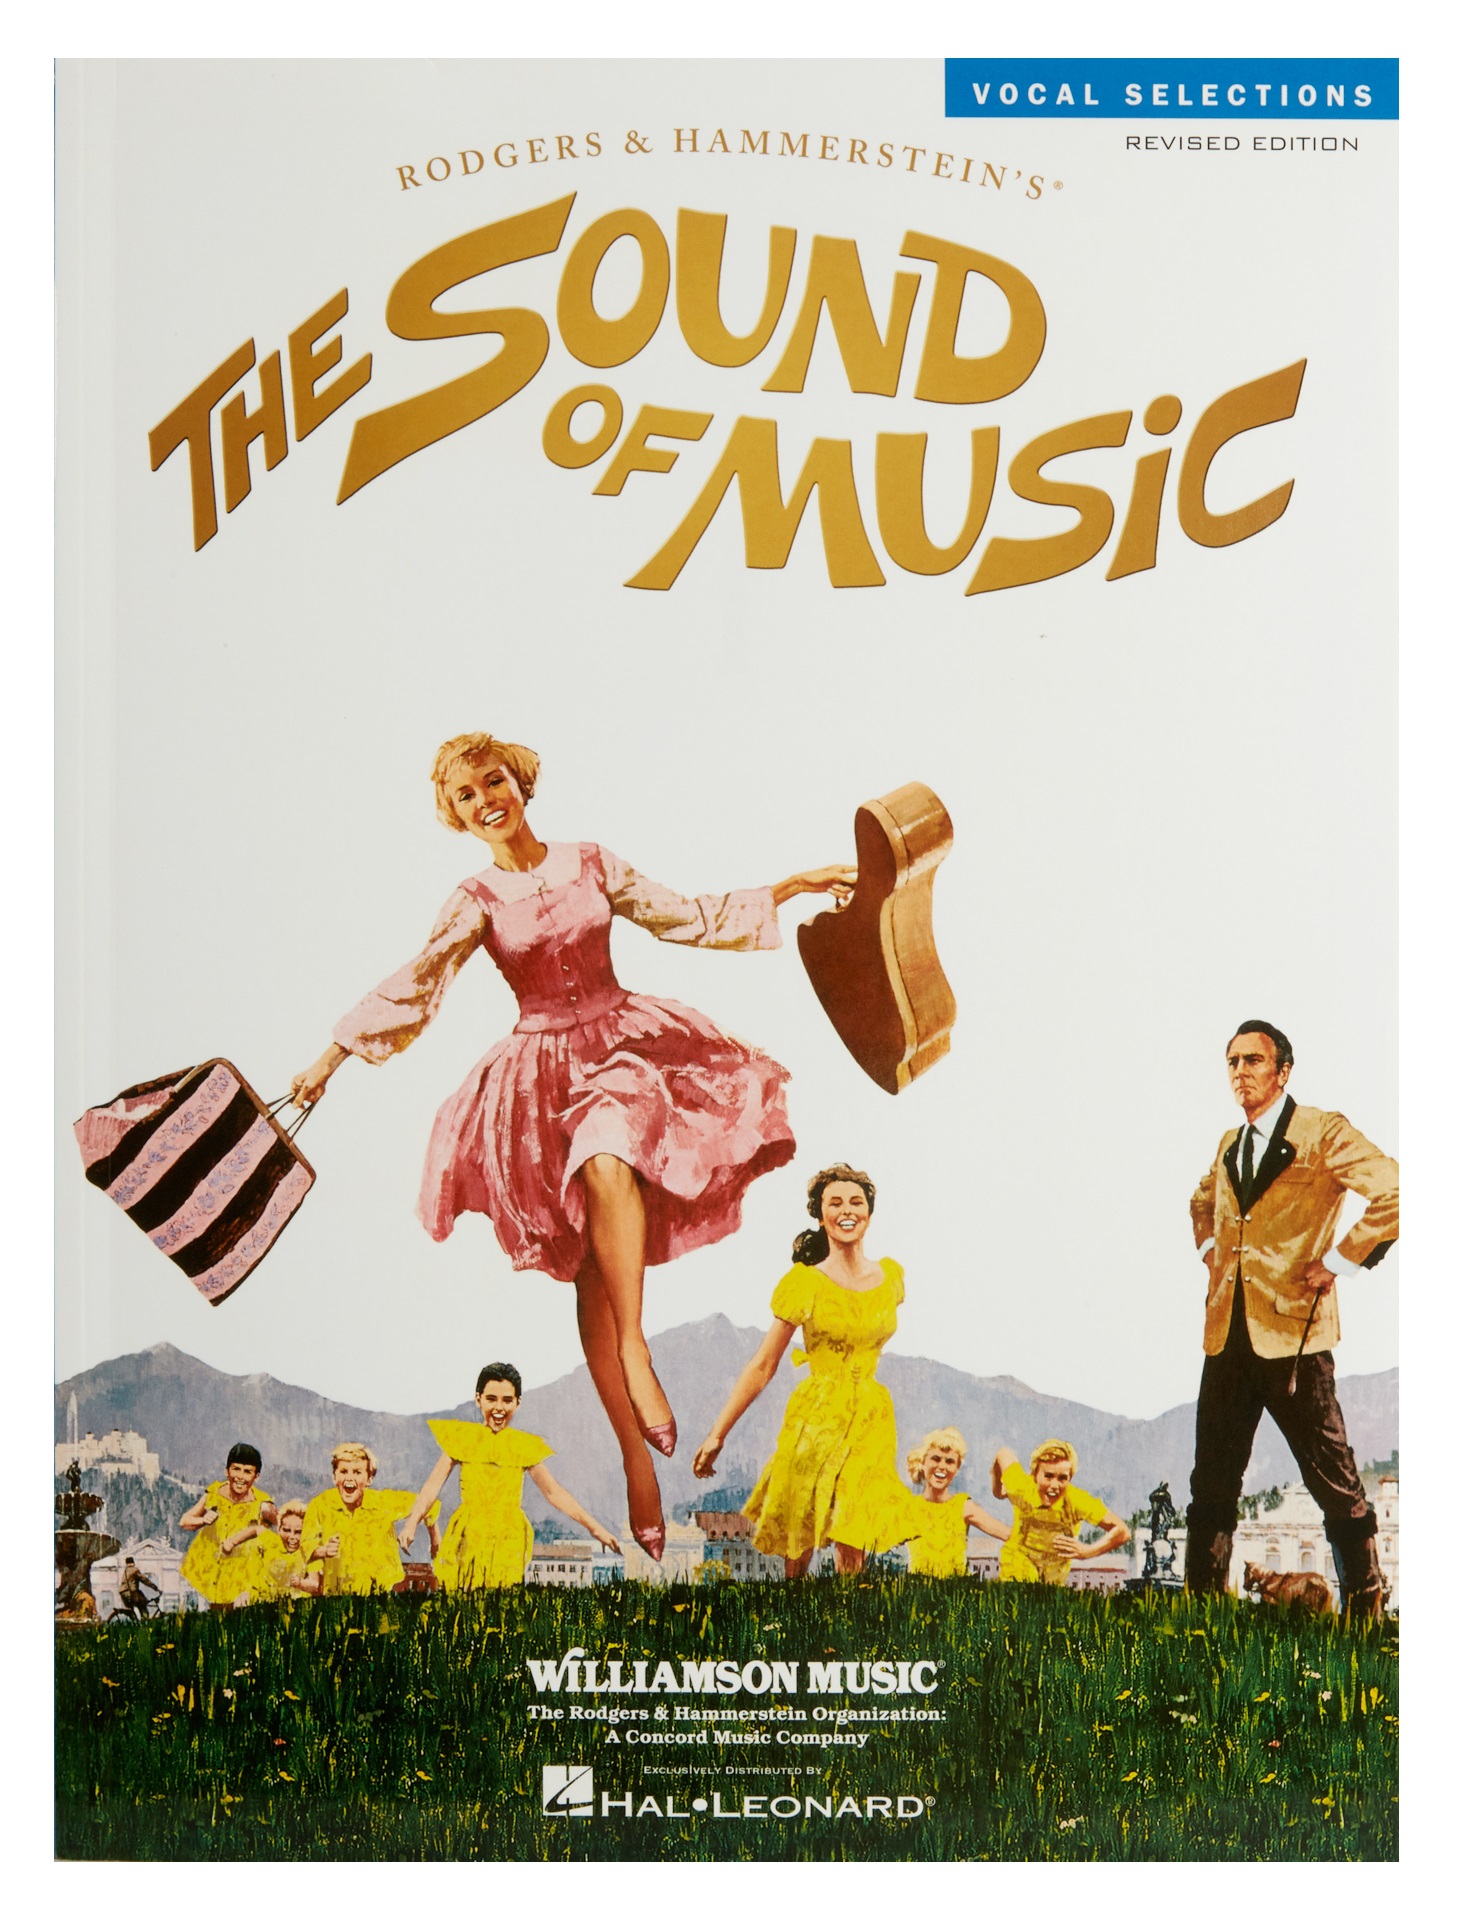 Fotografie MS Sound Of Music Vocal Selections (Revised Edition)